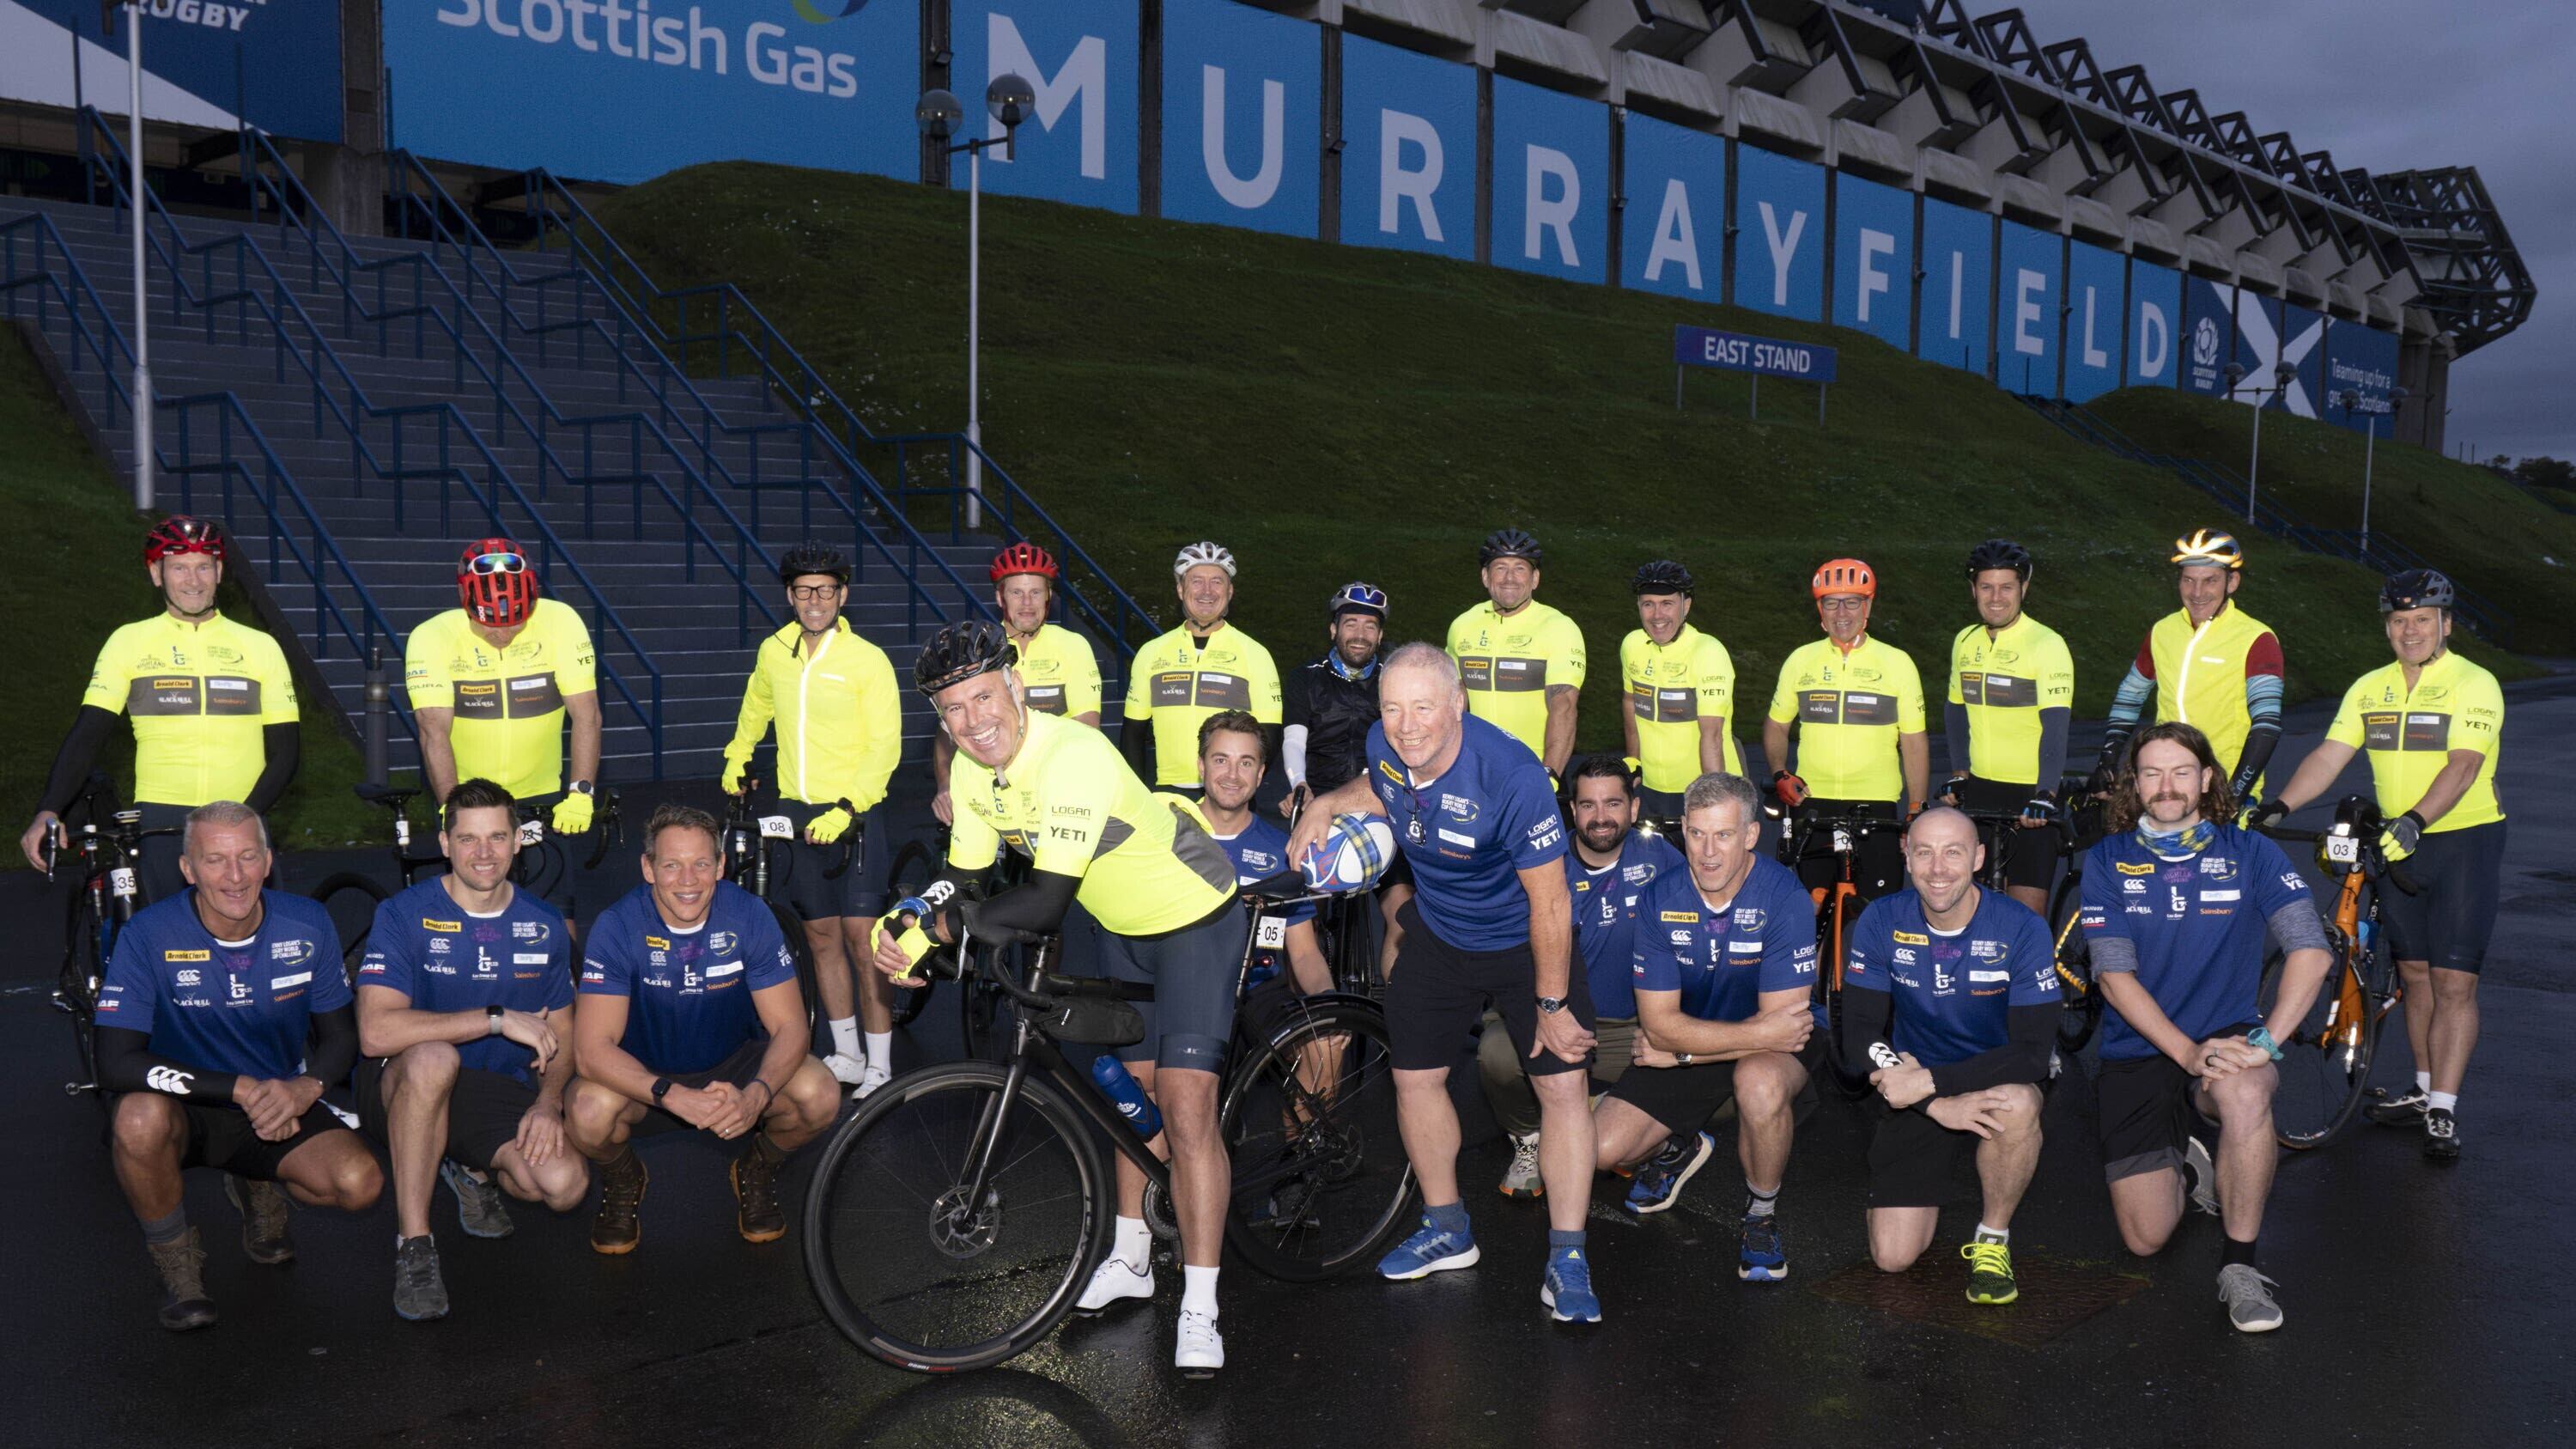 Starting in Edinburgh, the walk and cycle will see the team travel around 100 miles a day (Mark F Gibson/PA)